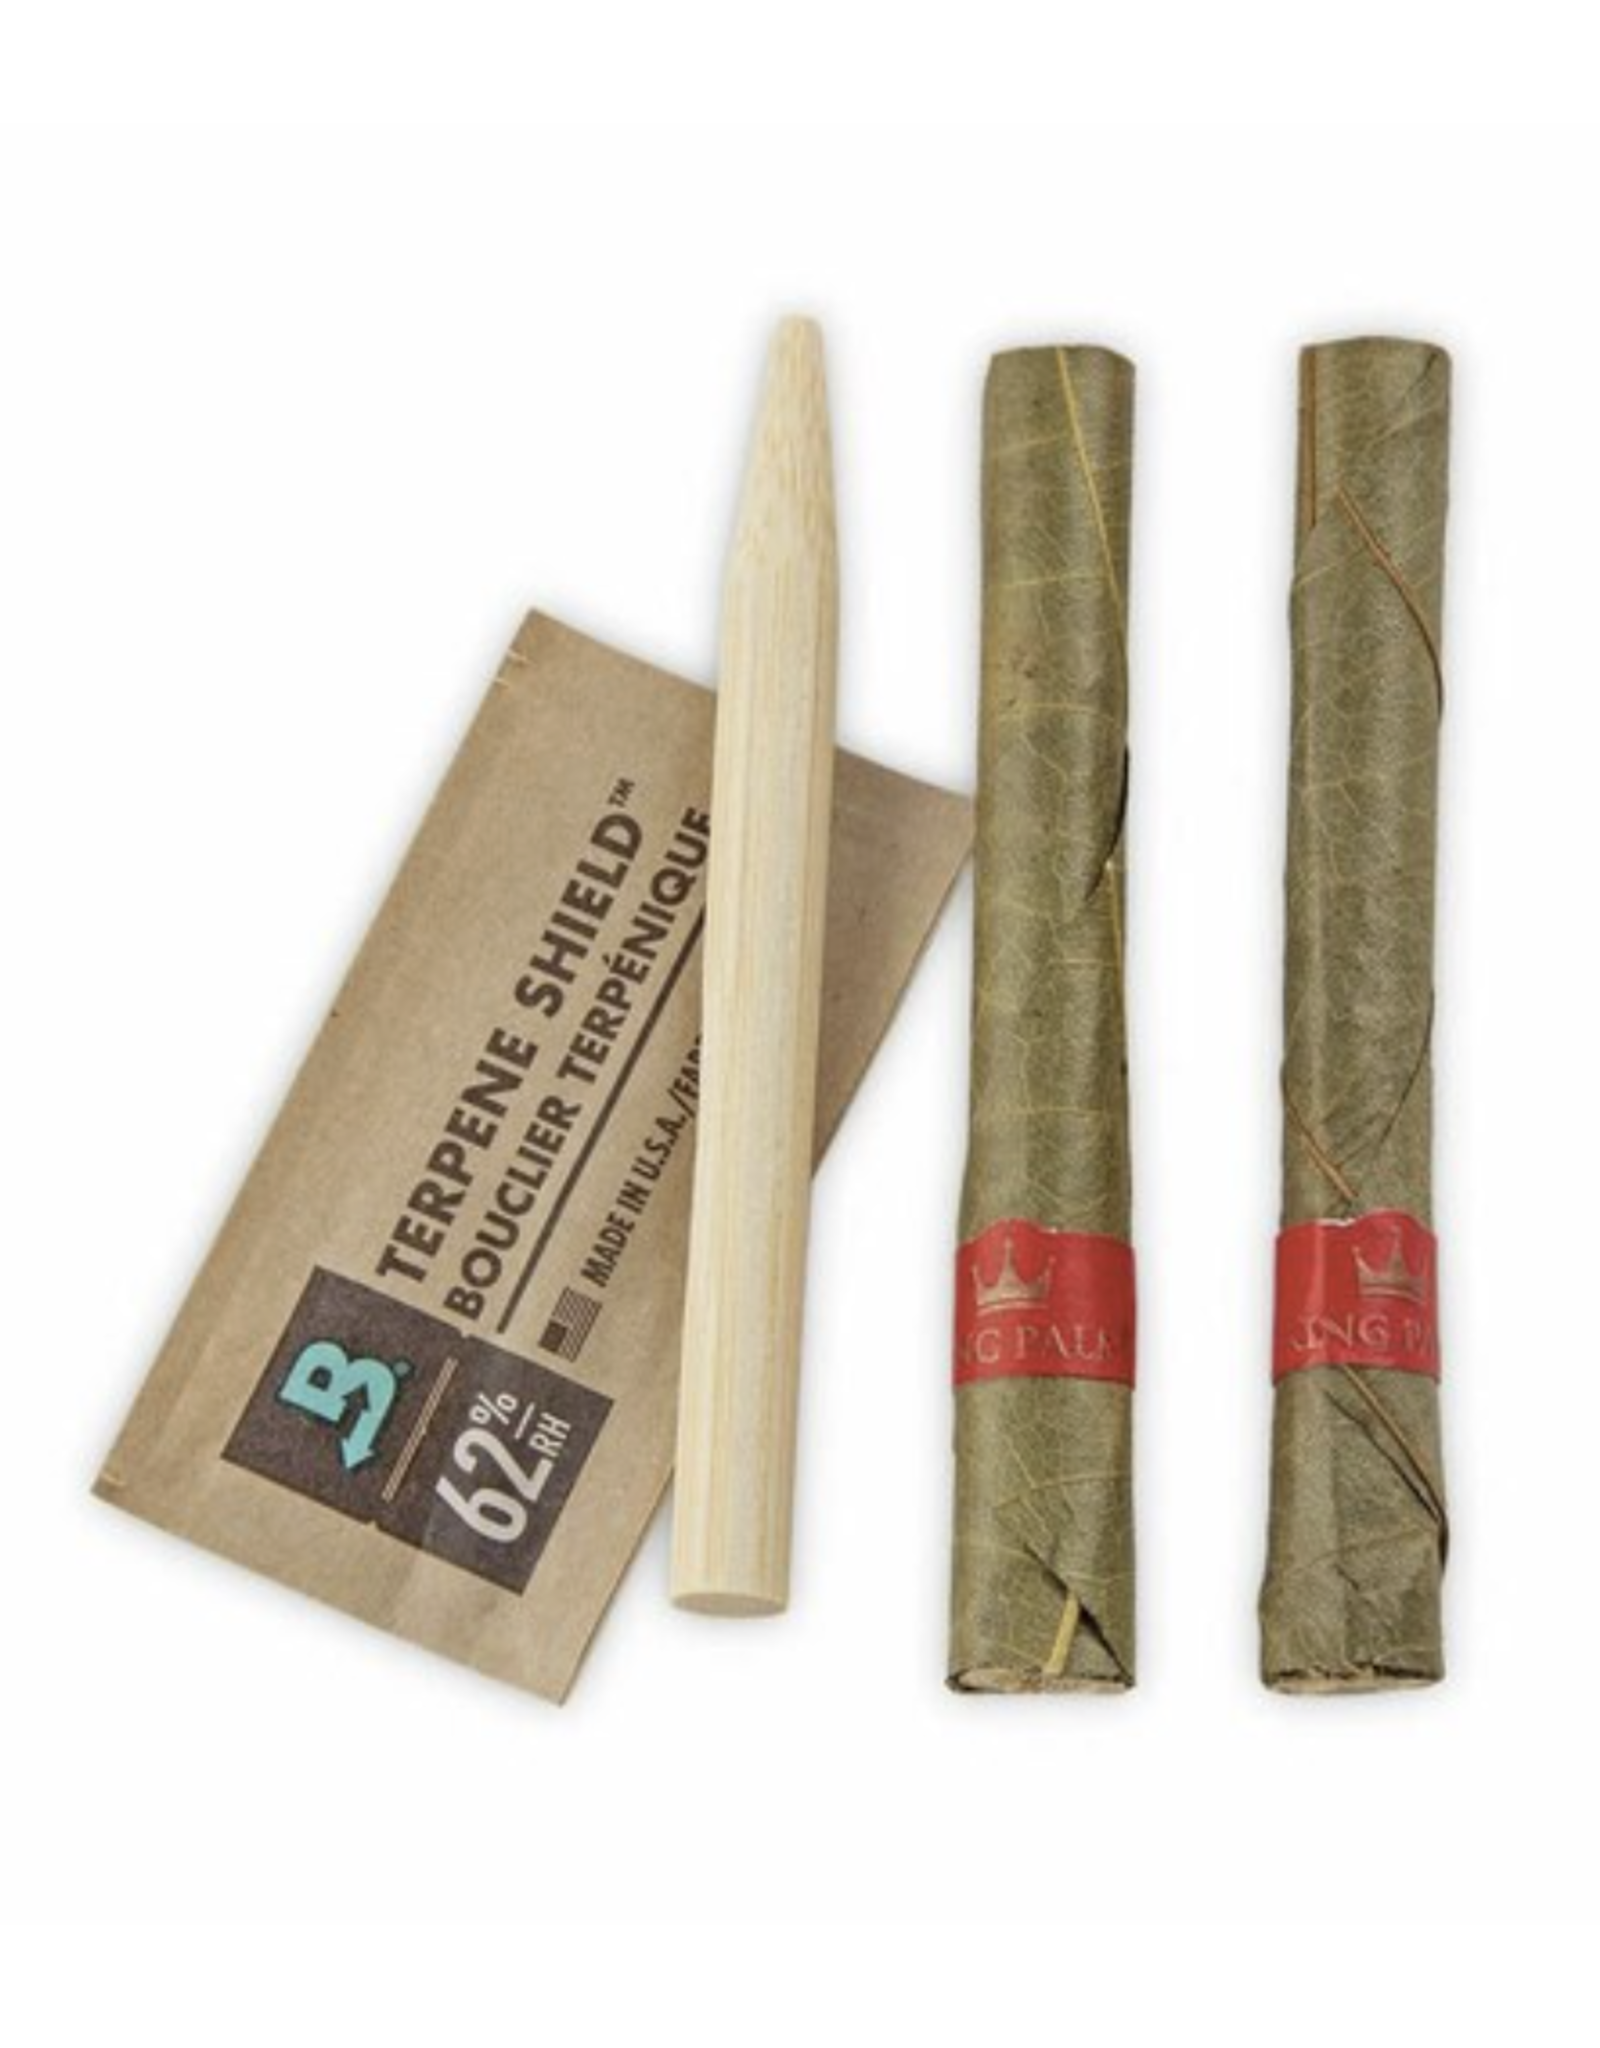 King Palm King Palm Flavoured Mini Pre-Roll Pouch, 2 Per Pack